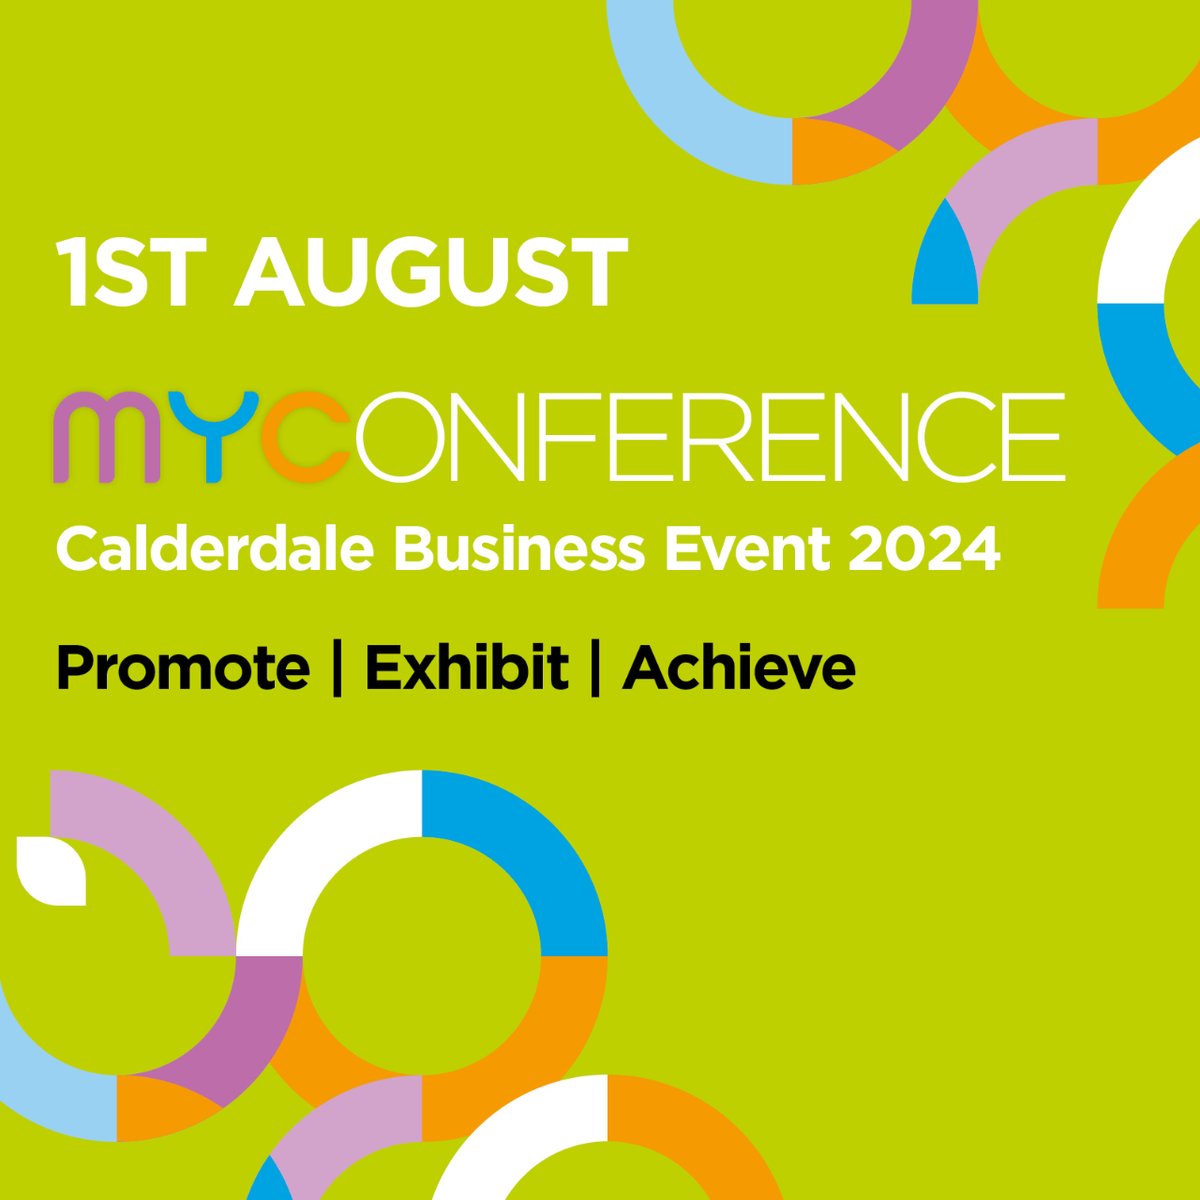 We’re now taking bookings for #MYConfCalderdale exhibition stands!

If you’re interested in showcasing your brand to over 200+ local businesspeople on #YorkshireDay, contact the events team now to secure your stand.

📧 events@my-chamber.co.uk
📞 01484 483 660